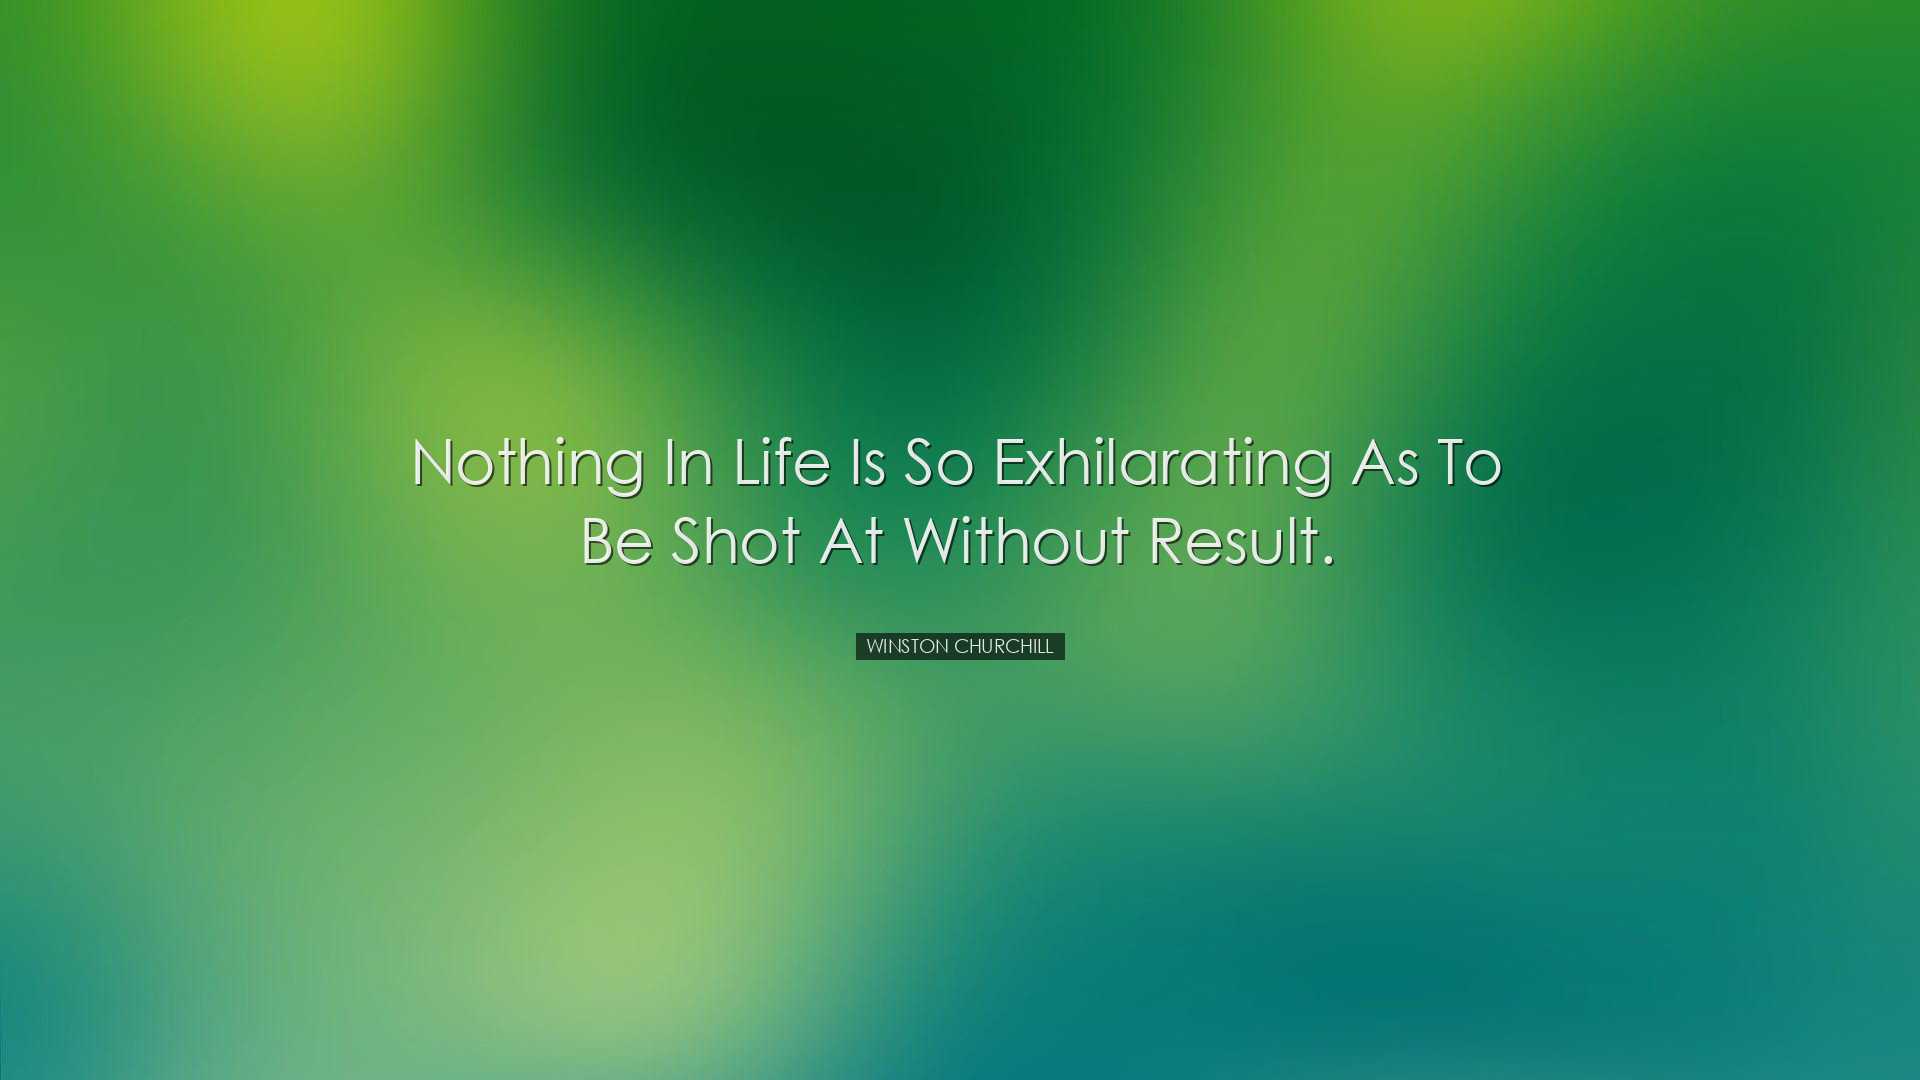 Nothing in life is so exhilarating as to be shot at without result